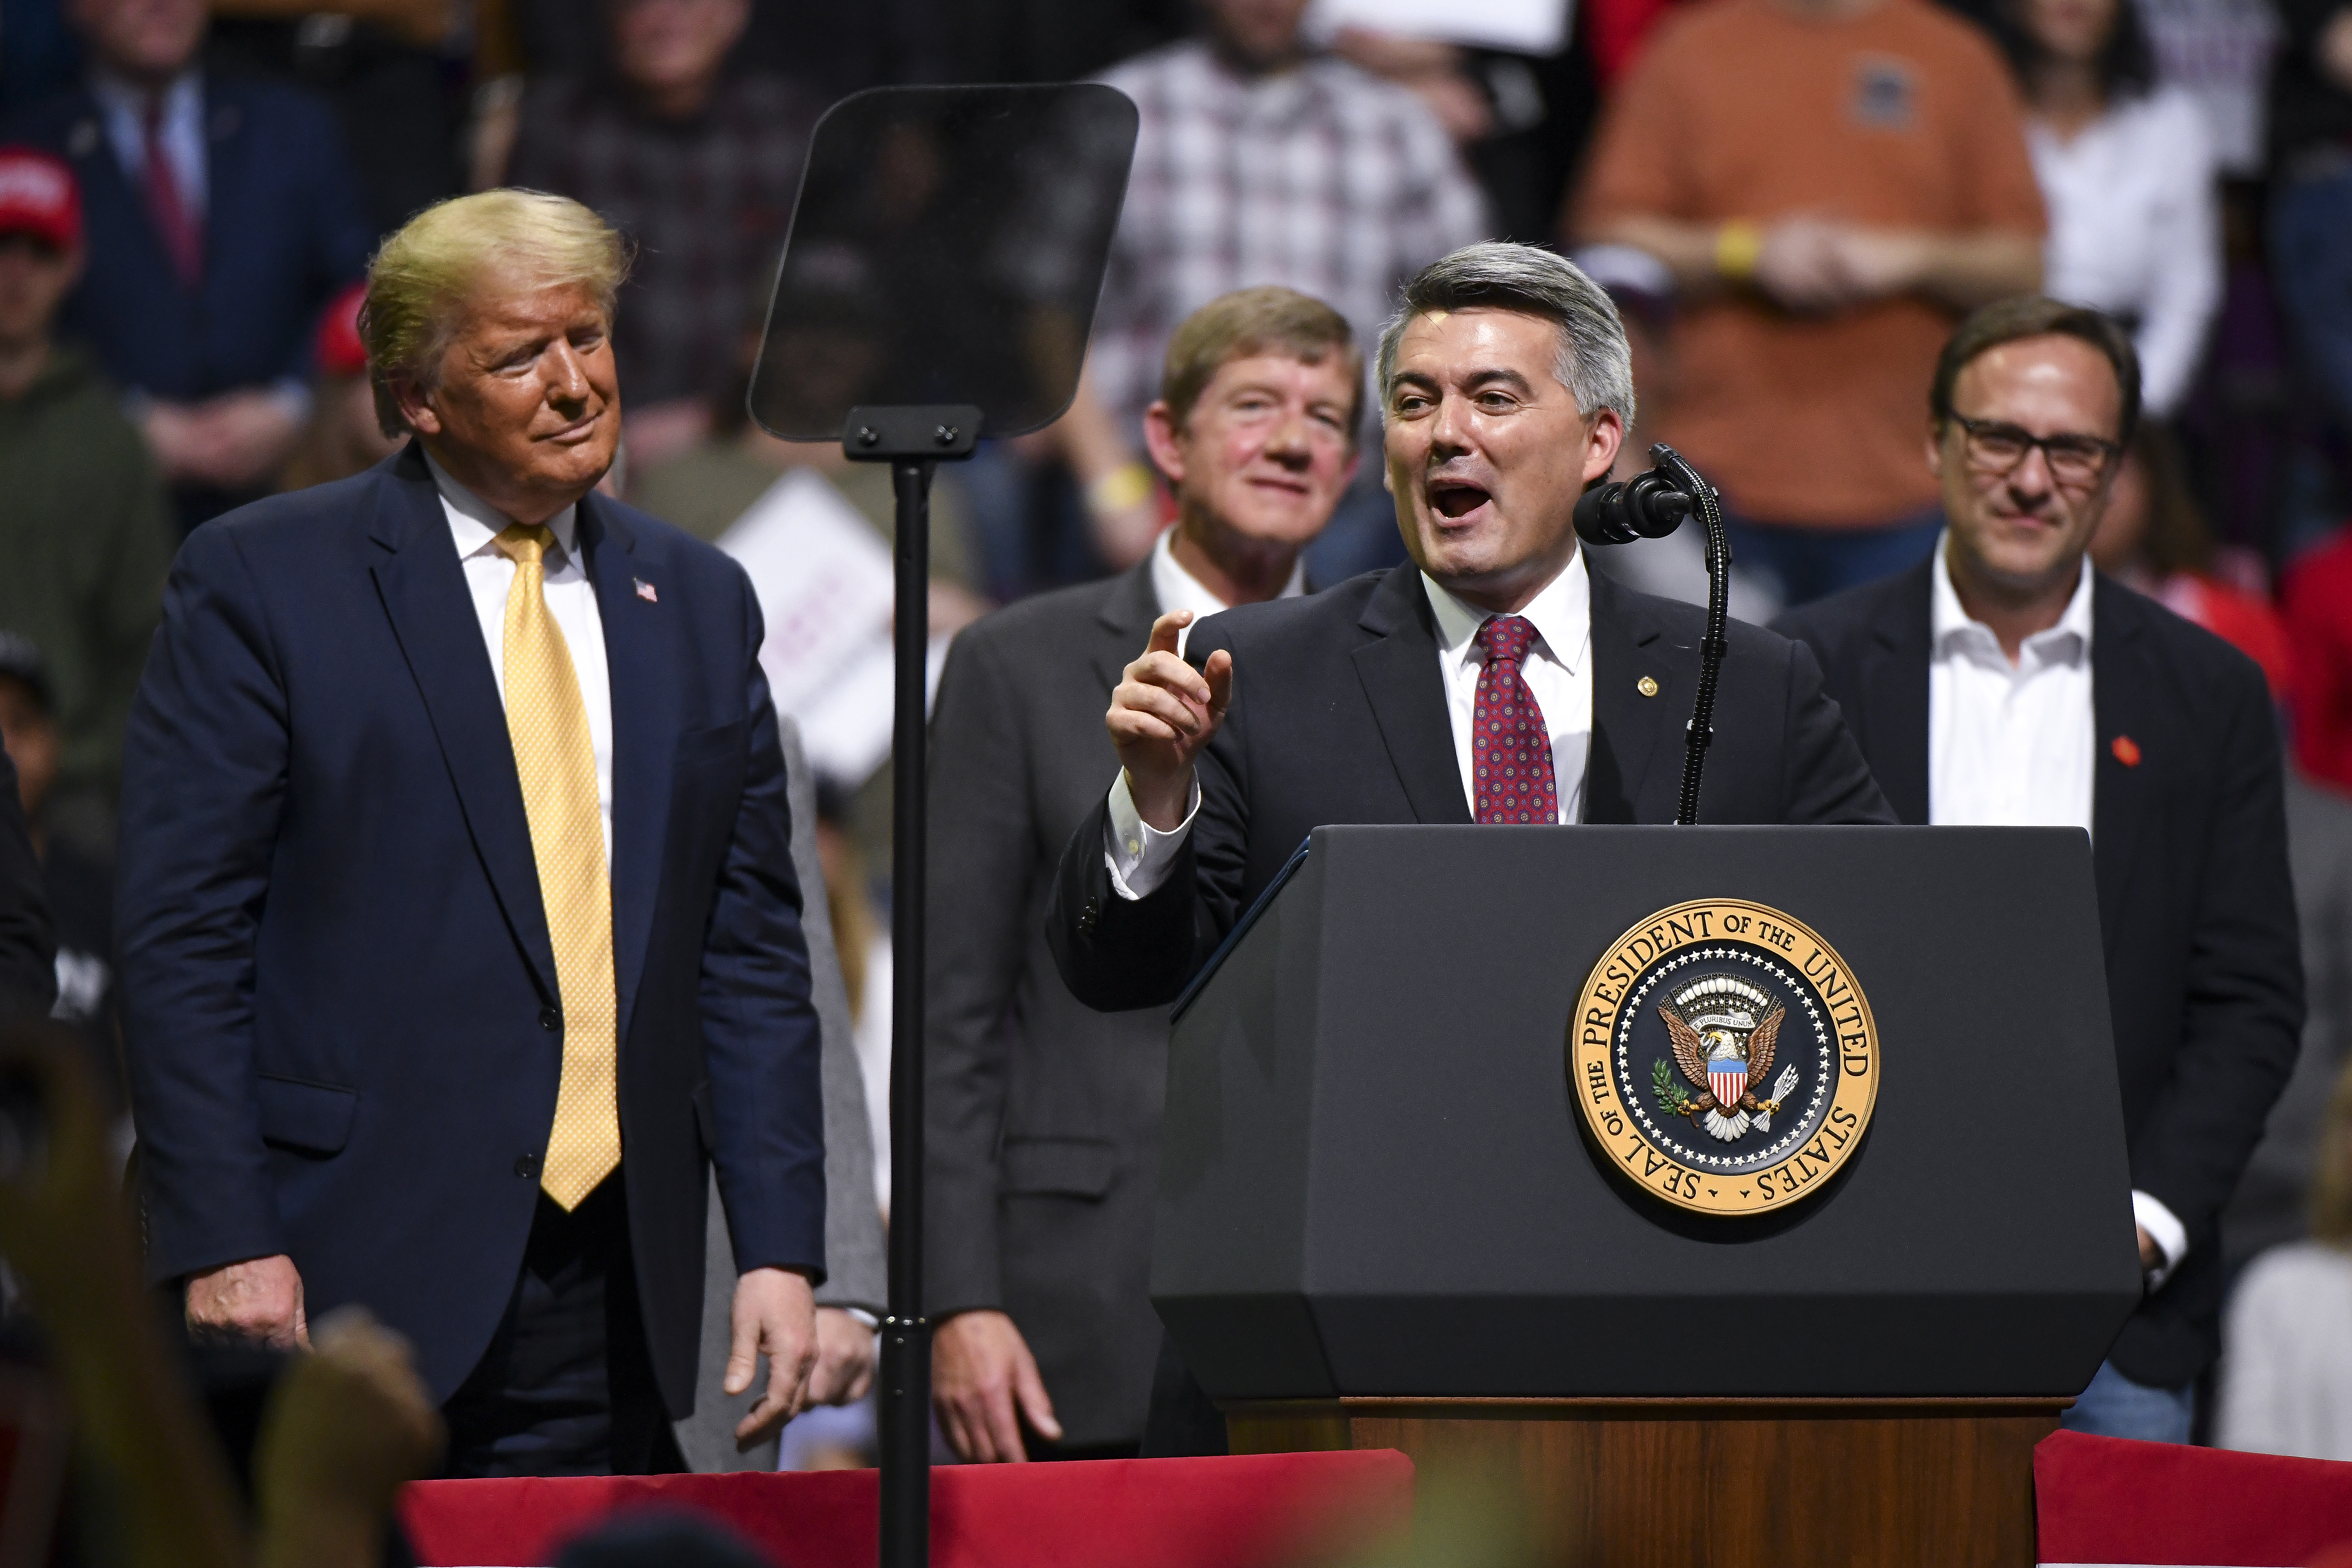 Sen. Cory Gardner speaks with President Donald Trump on stage during a Keep America Great rally on Feb. 20, 2020, in Colorado Springs.